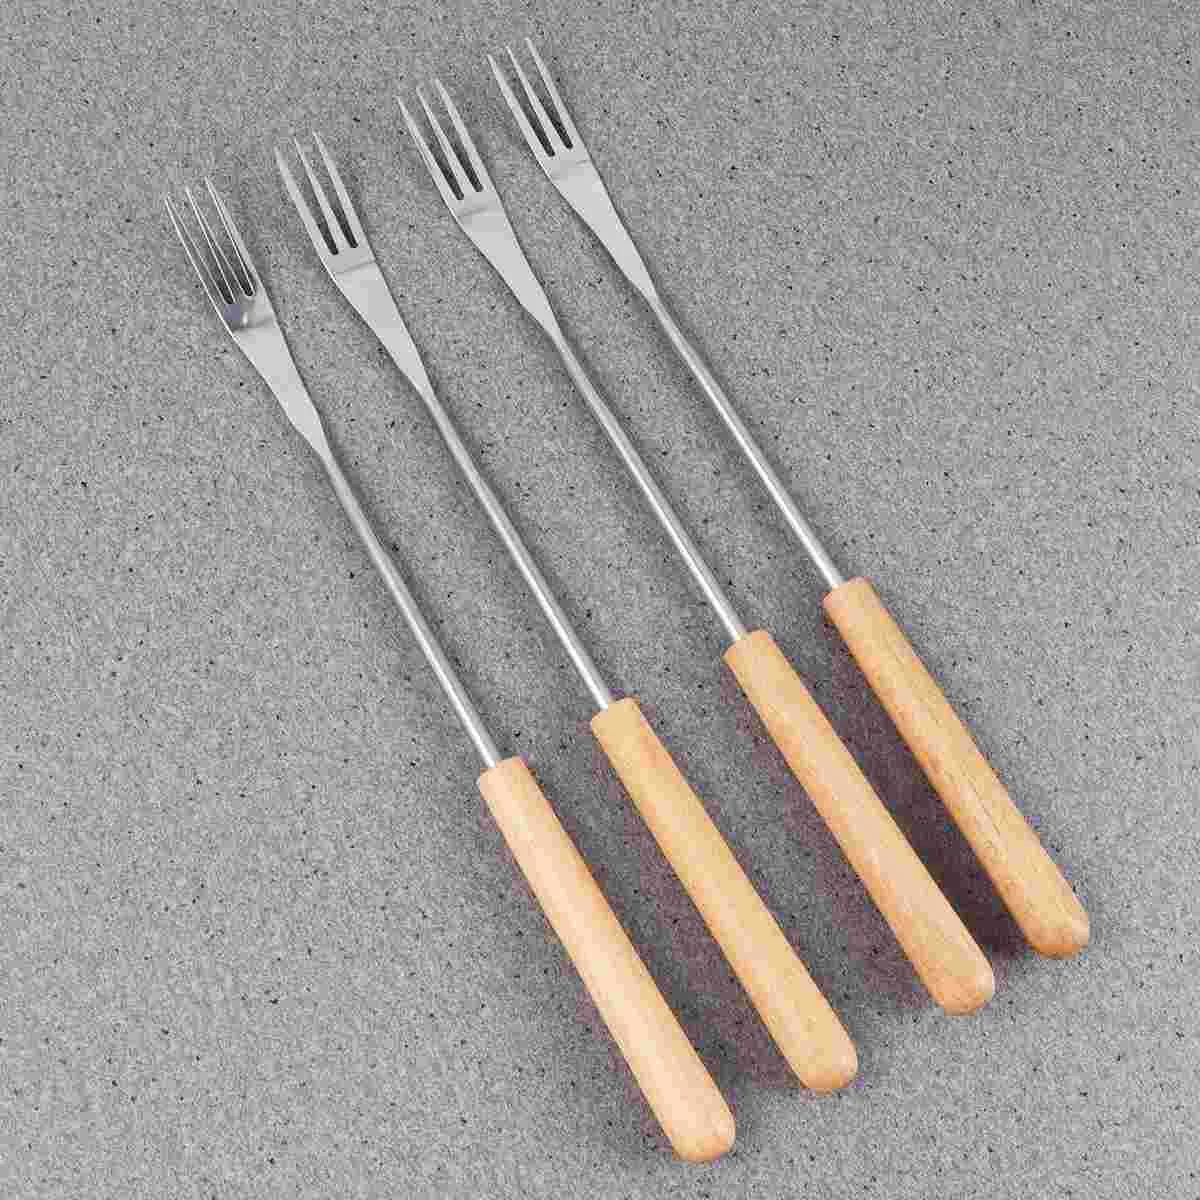 

Fondue Forks Fork Skewers Sticks Stainless Steel Handle Chocolate Cheese Wood Barbecue Grilling Fruit Hot Bbq Pot Dessert Wooden